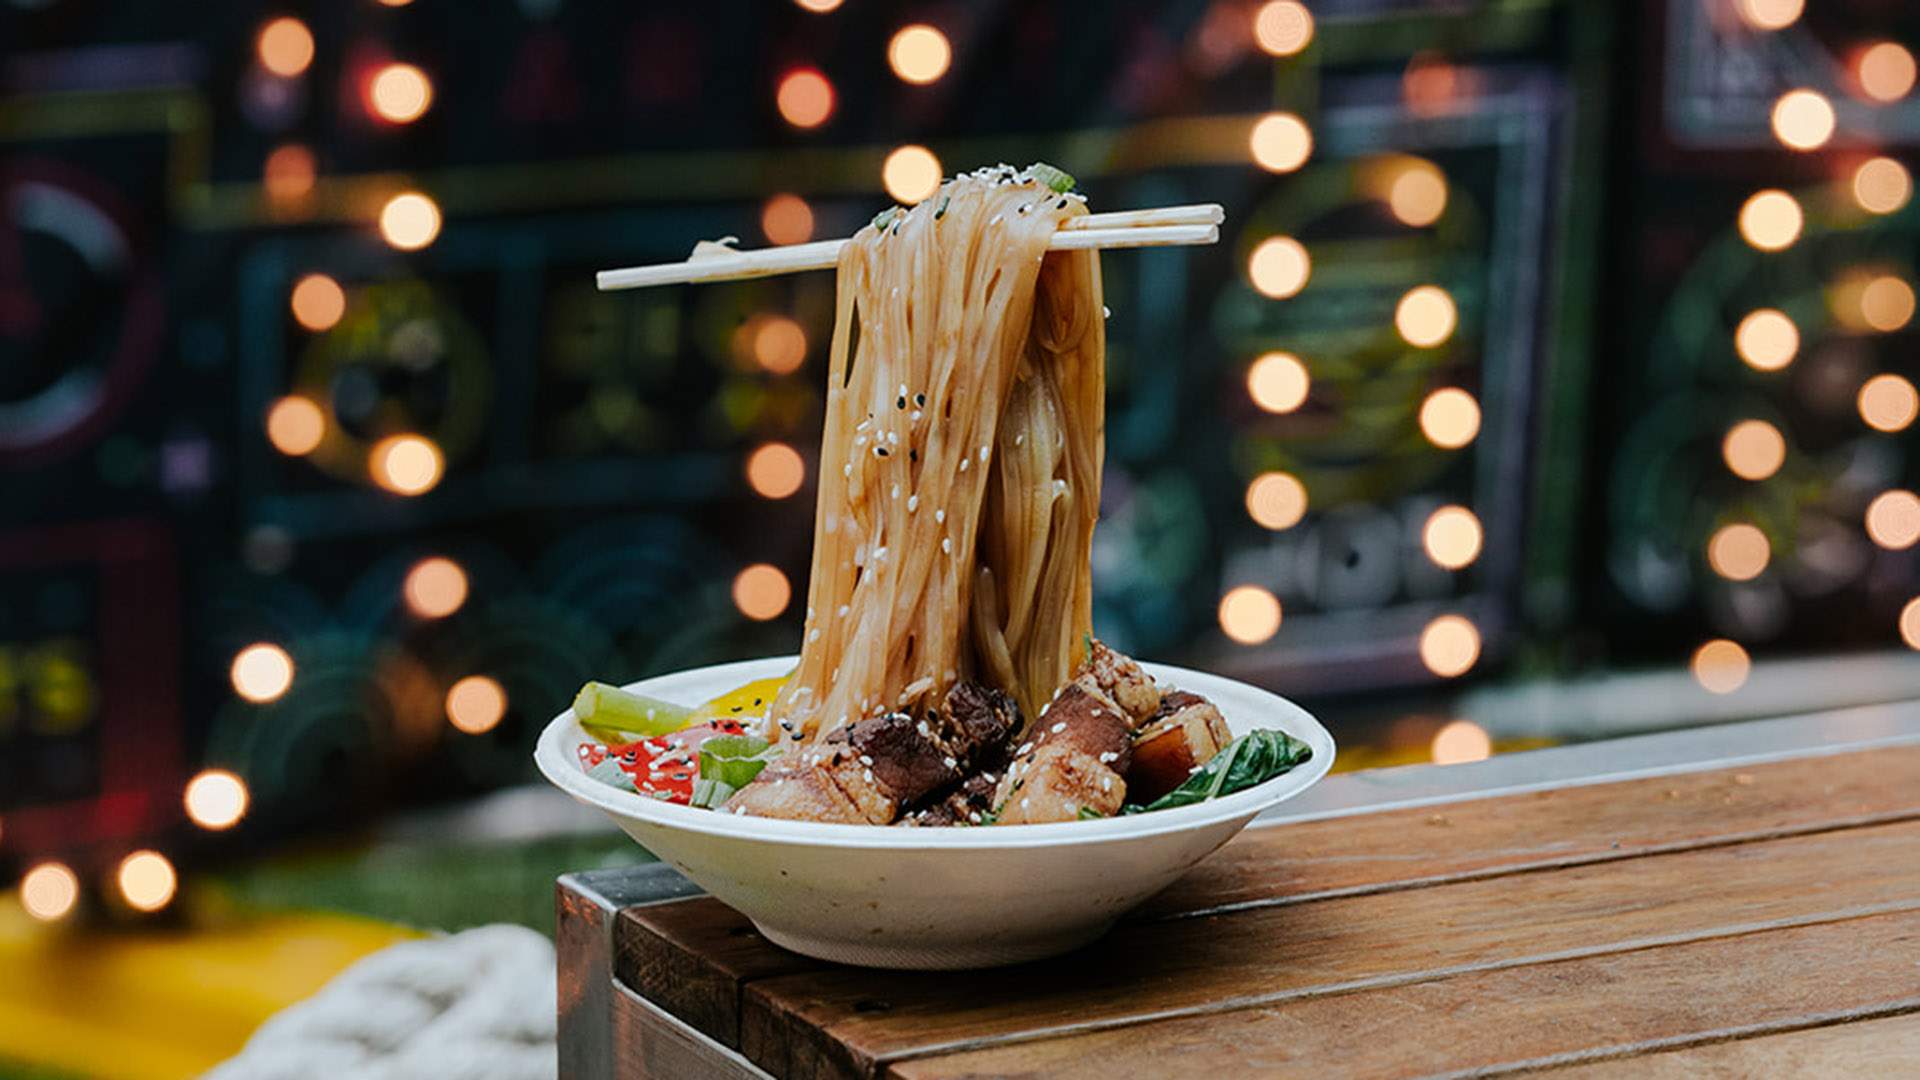 Mochi Doughnuts, Skewers and Gravity-Defying Noods: Here's the Brisbane Night Noodle Markets Menu